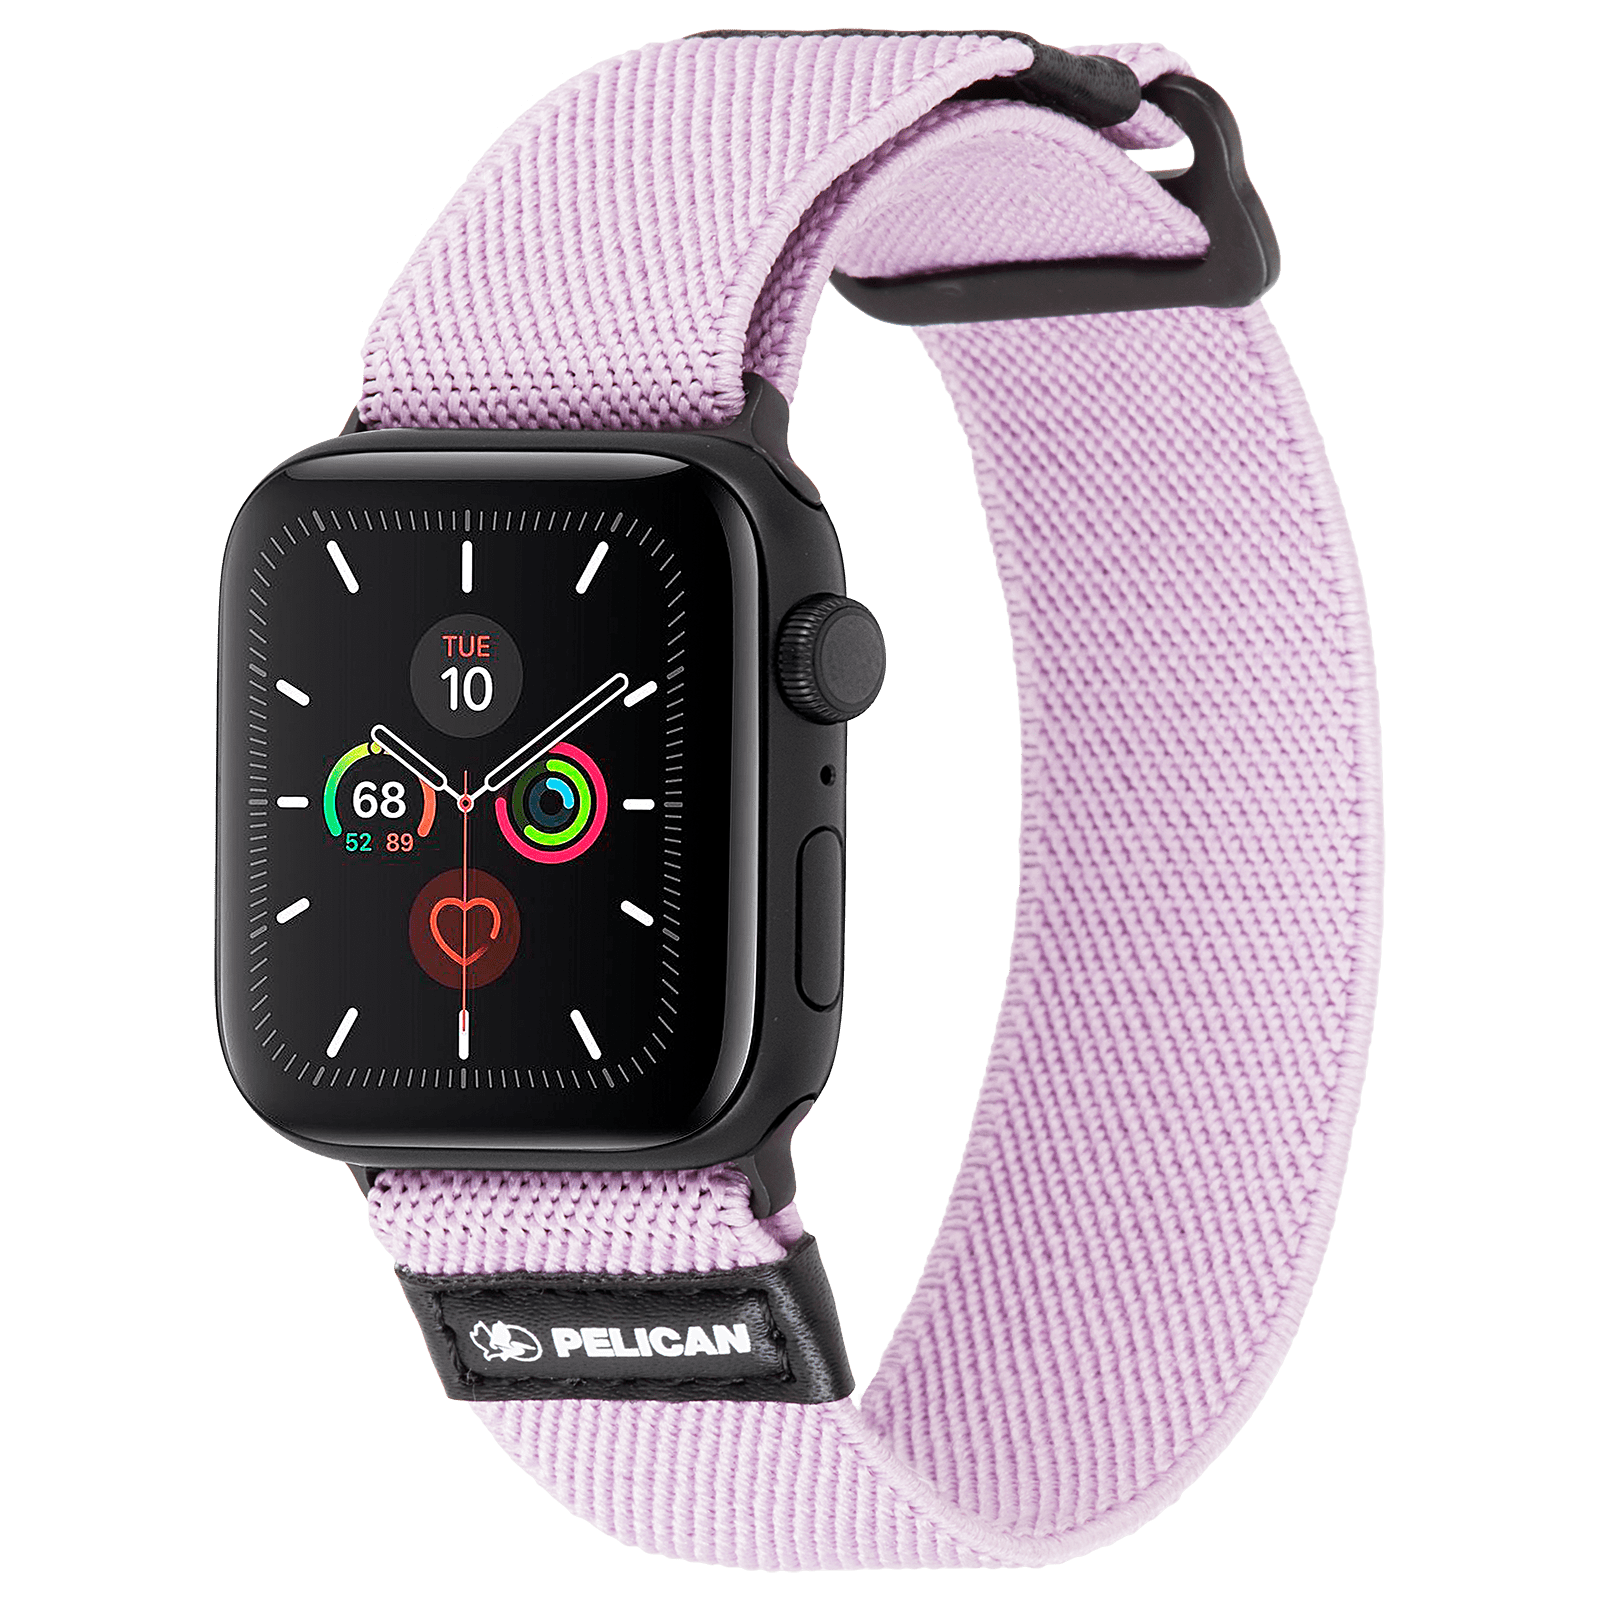 Pelican - PROTECTOR Series - Watch Band for Apple Watch Series 1/2/3/4/5 -  38-40mm - Mauve Purple